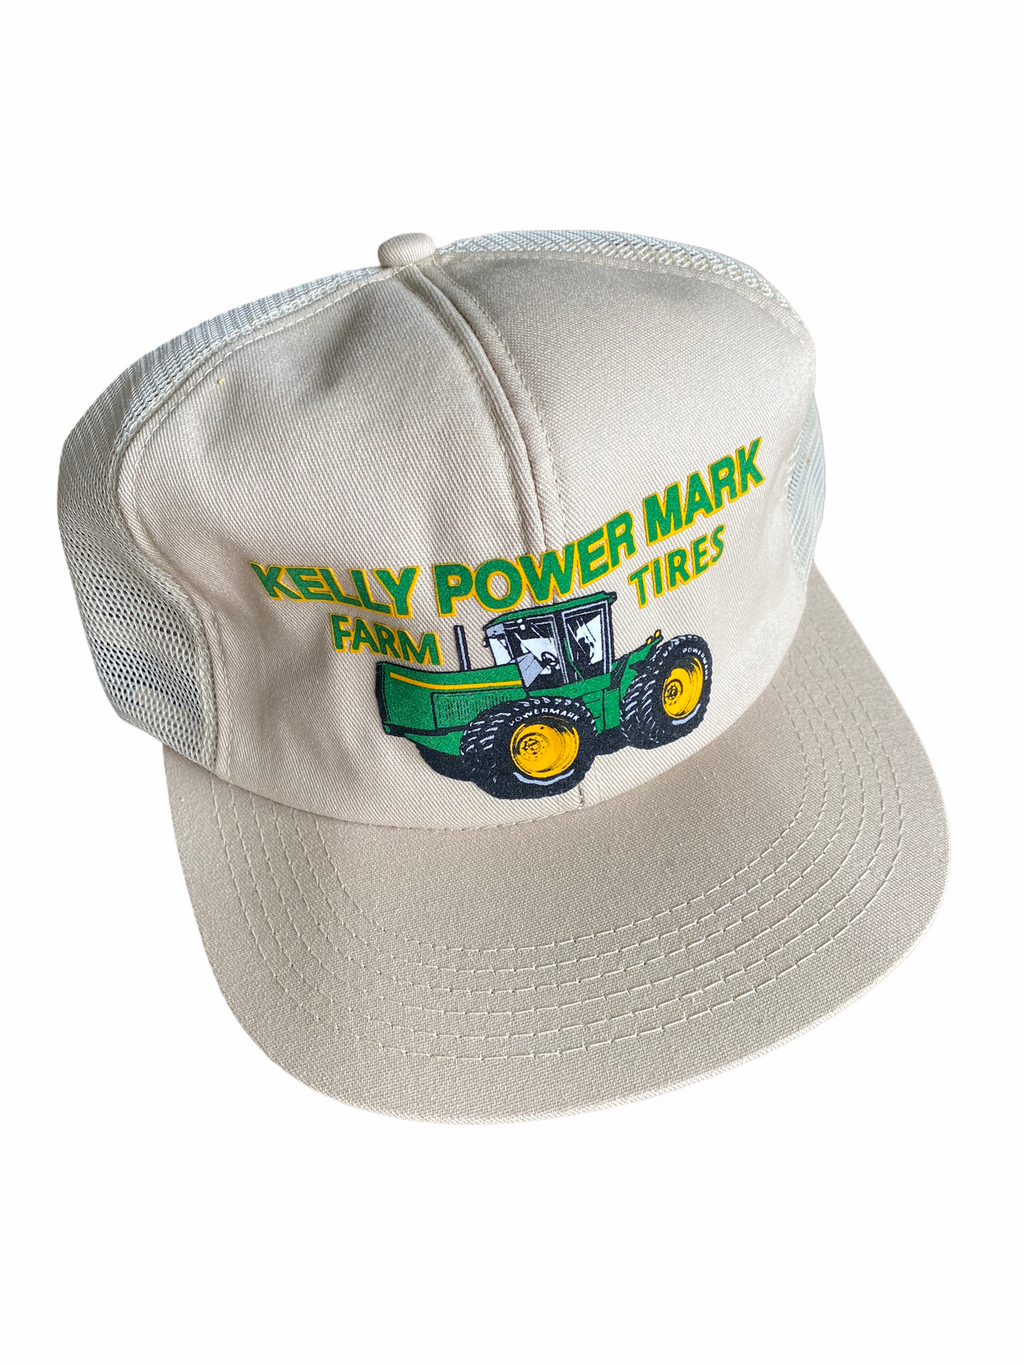 Kelly power mark k products hat